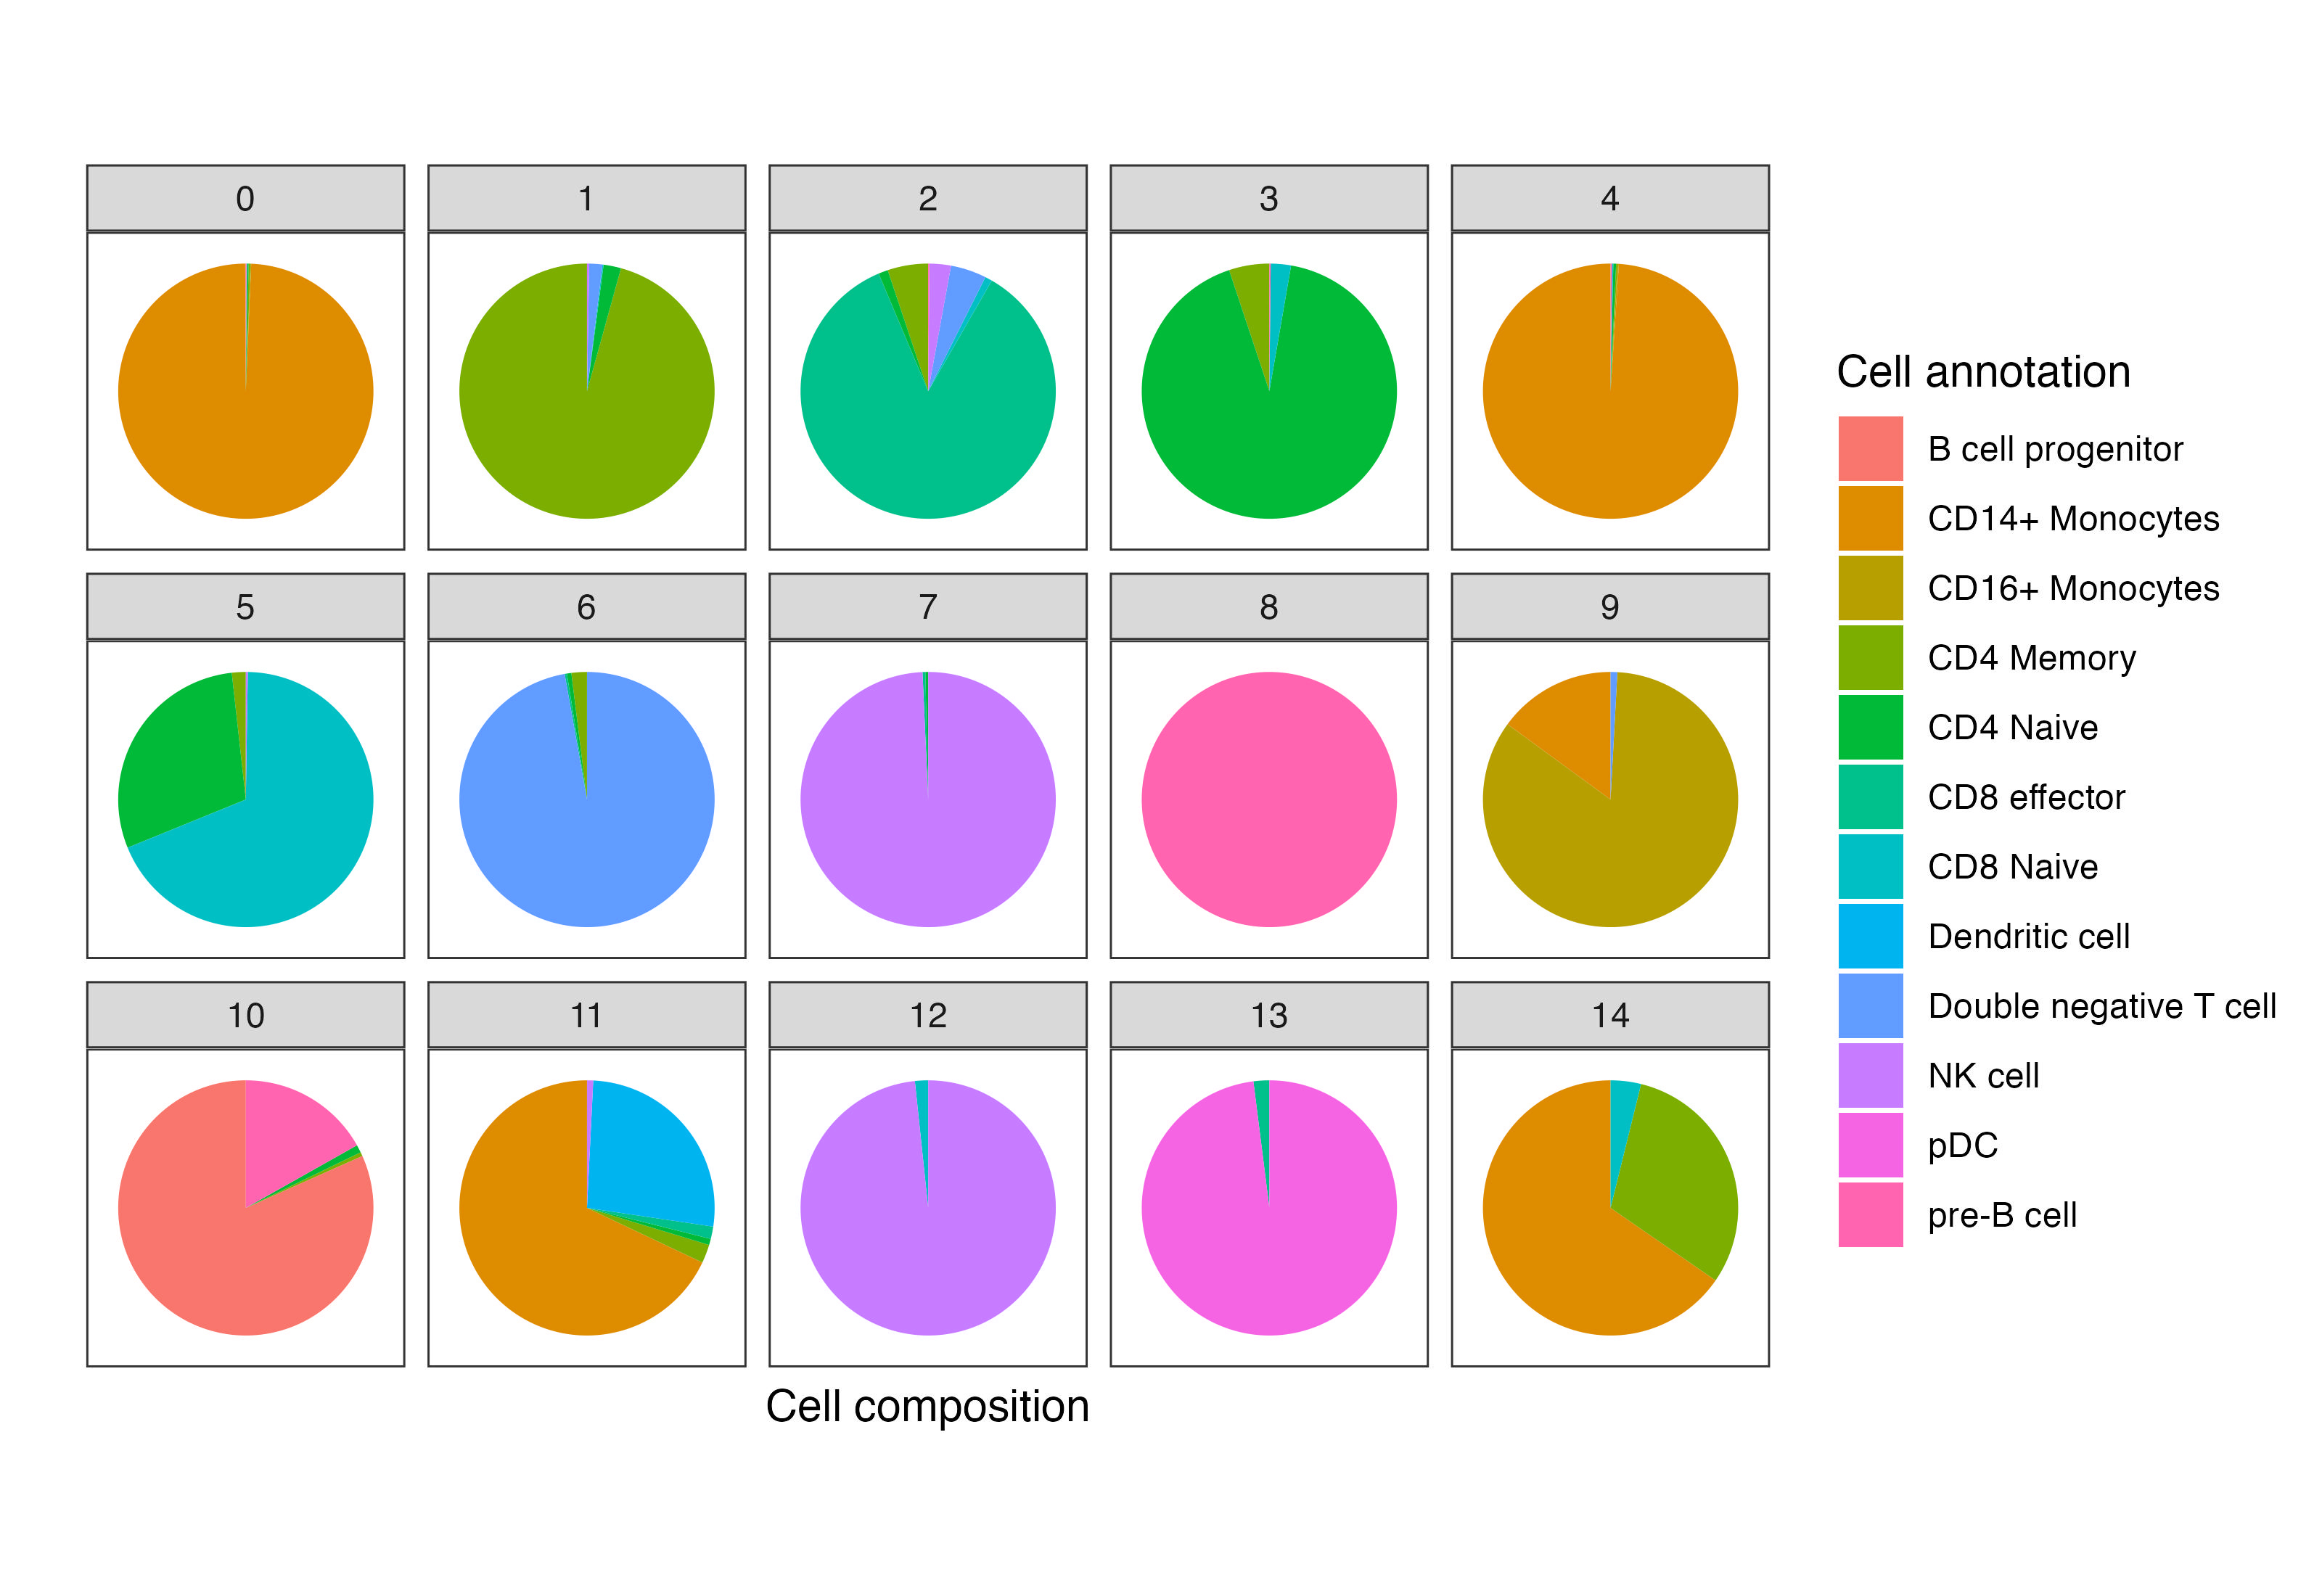 Pie charts summarizing cell type composition per cluster